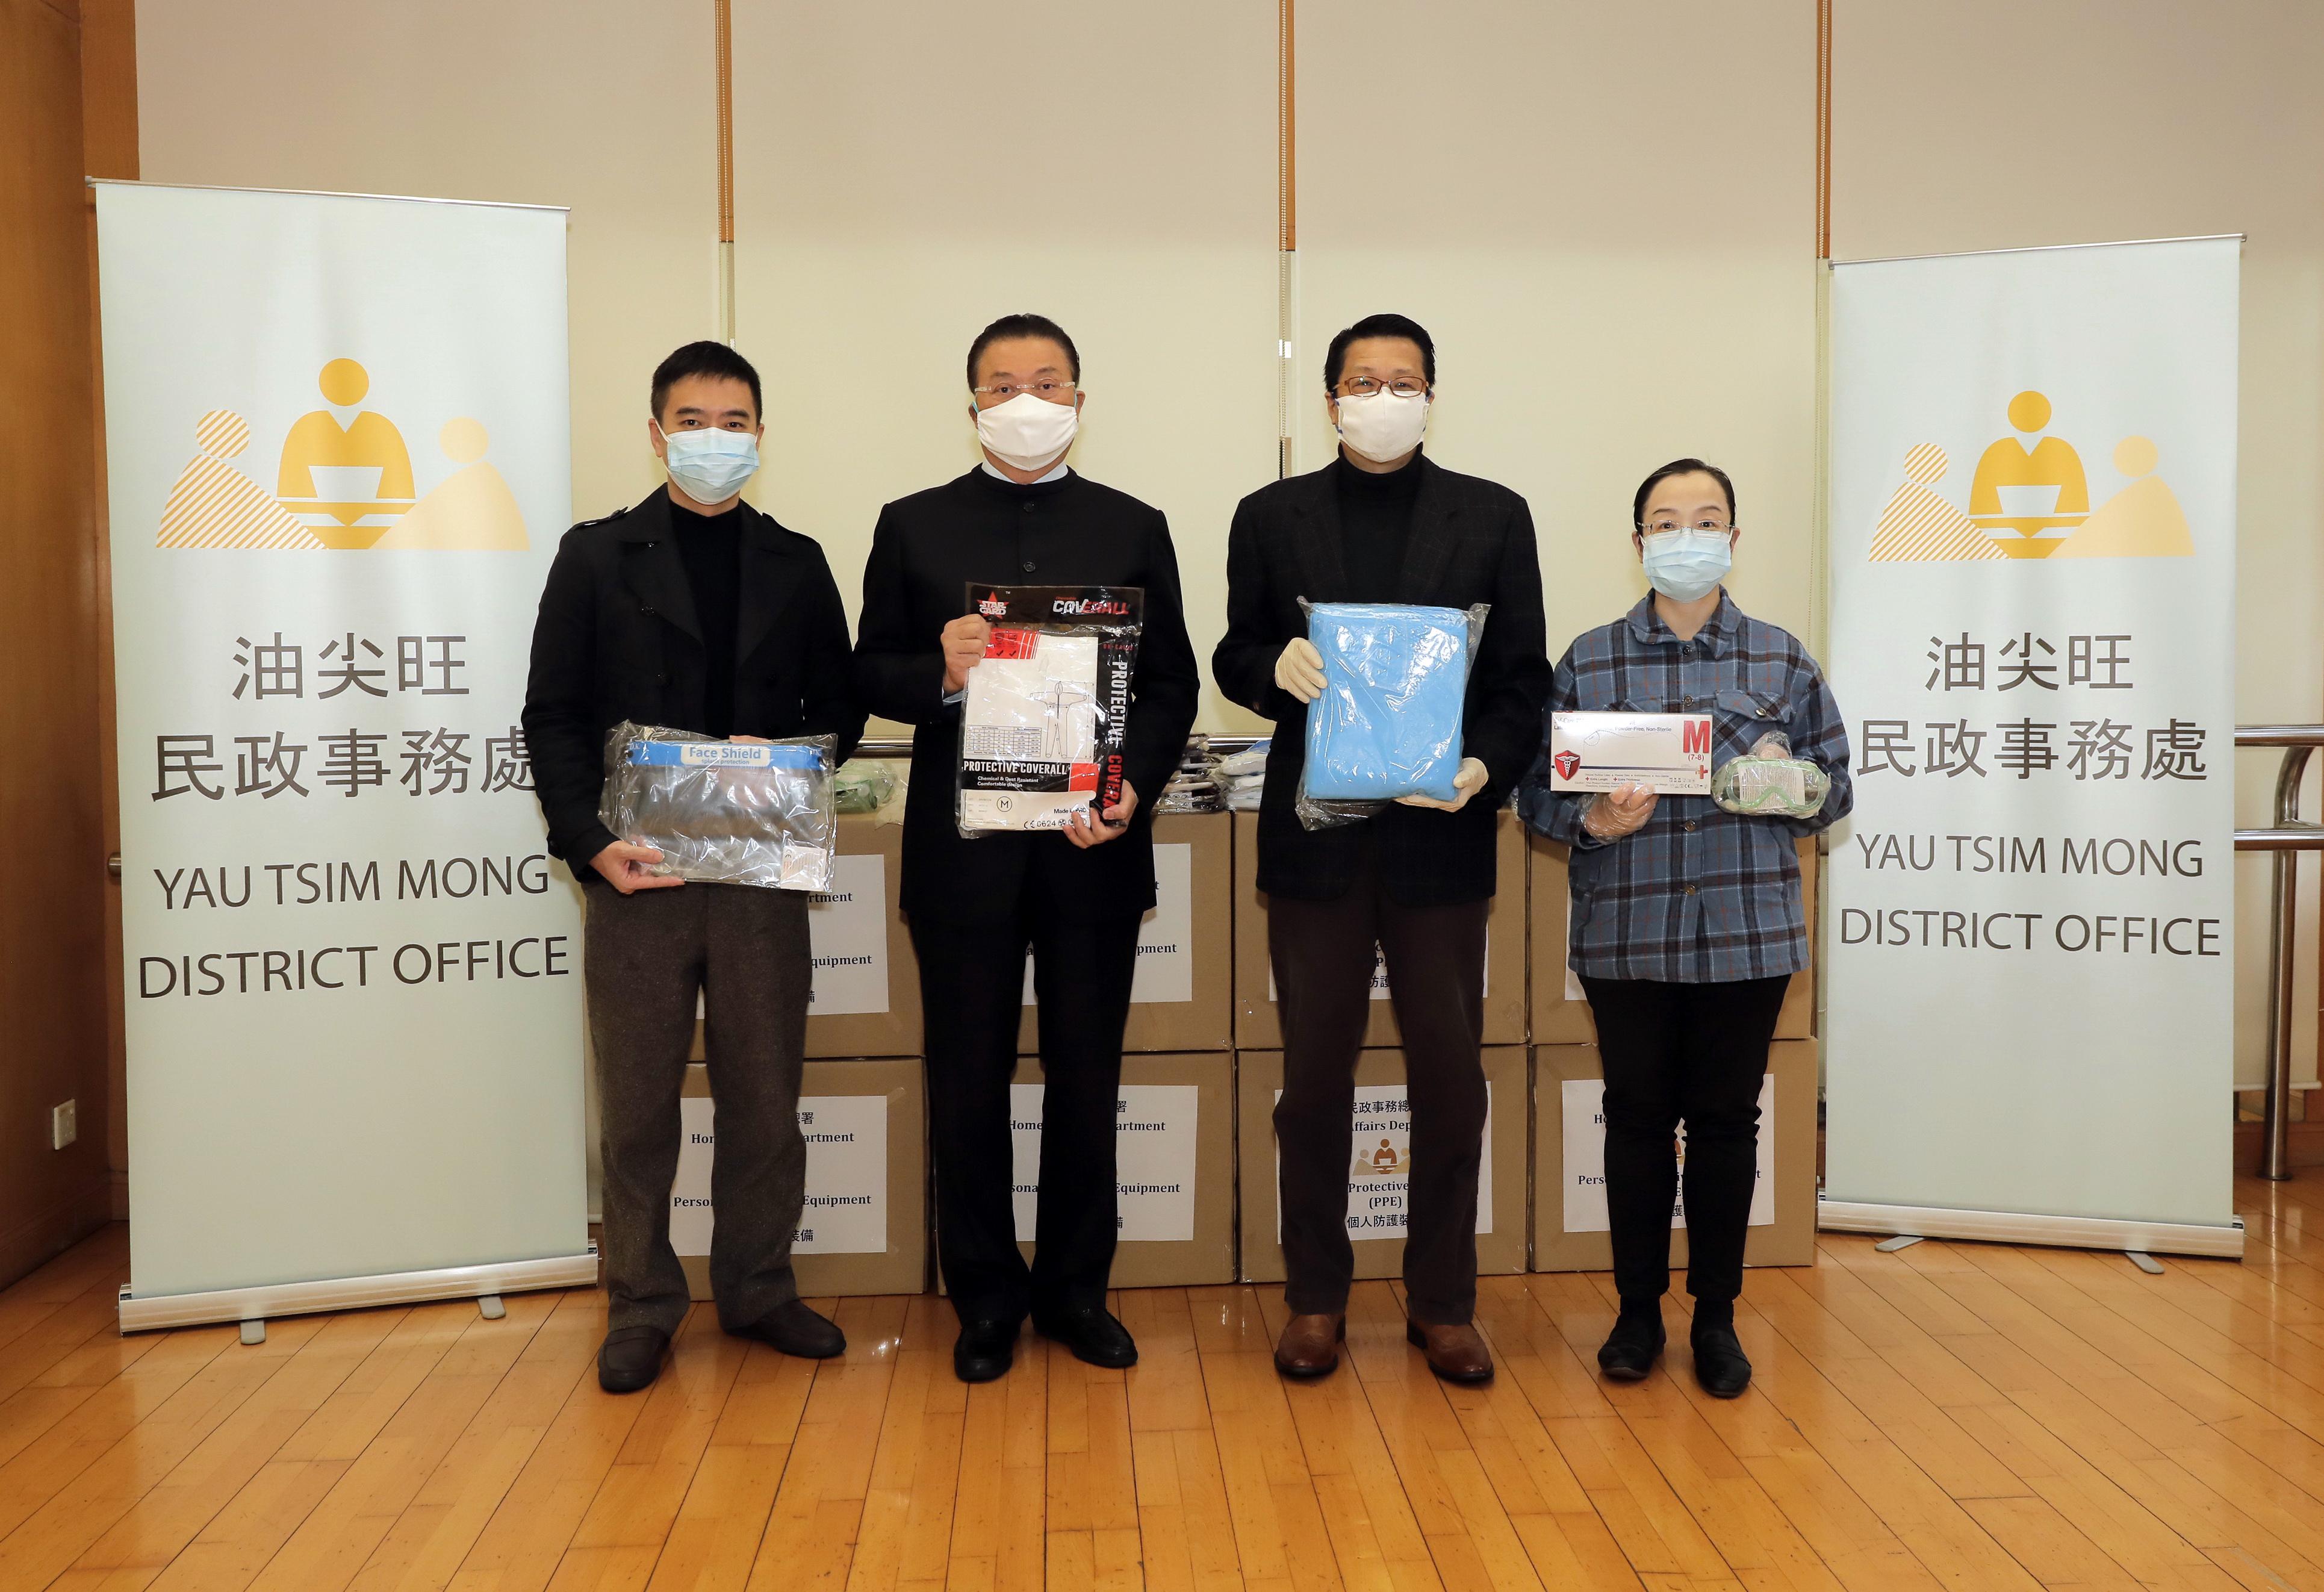 The Acting Secretary for Home Affairs, Mr Jack Chan, today (February 21) visited Henry G Leong Yaumatei Community Centre to present personal protective equipment to the Hong Kong Community Anti-Coronavirus Link. Photo shows (from left) the District Officer (Yau Tsim Mong), Mr Edward Yu; the chief convenor of the Hong Kong Community Anti-Coronavirus Link, Dr Bunny Chan; Mr Jack Chan, and the Acting Director of Home Affairs, Miss Vega Wong, at the presentation ceremony. 

